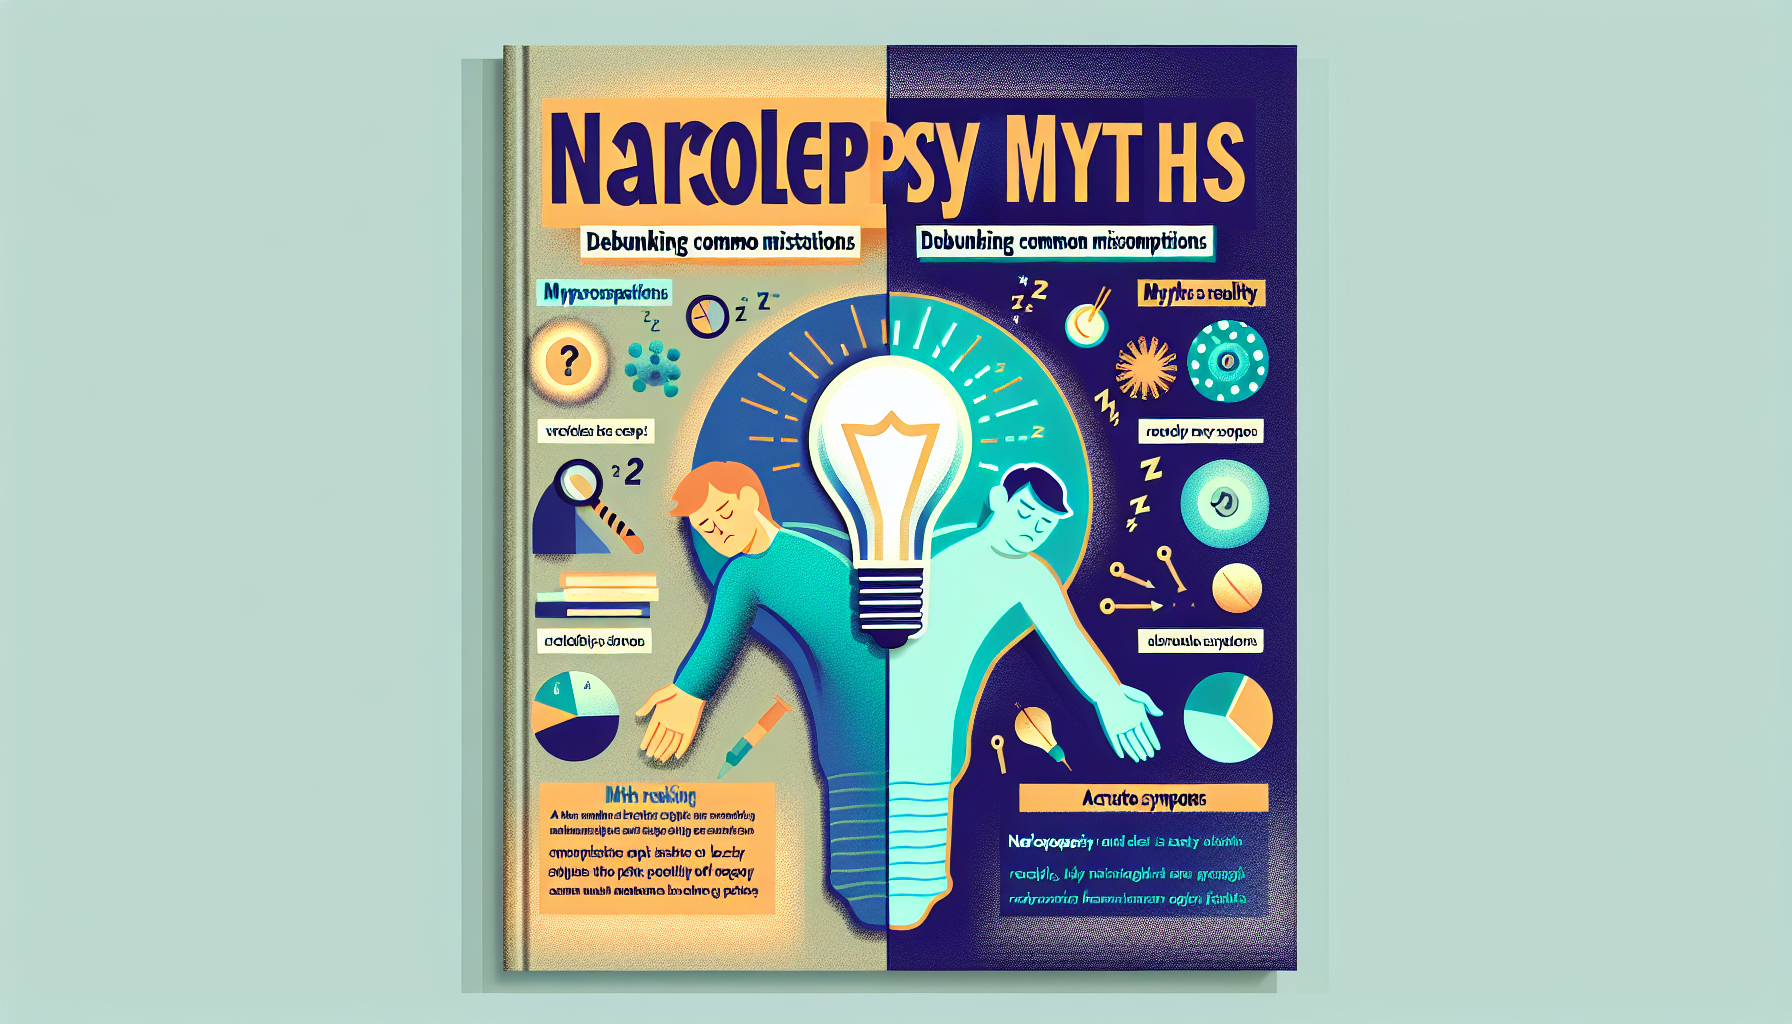 Narcolepsy Myths: Debunking Common Misconceptions